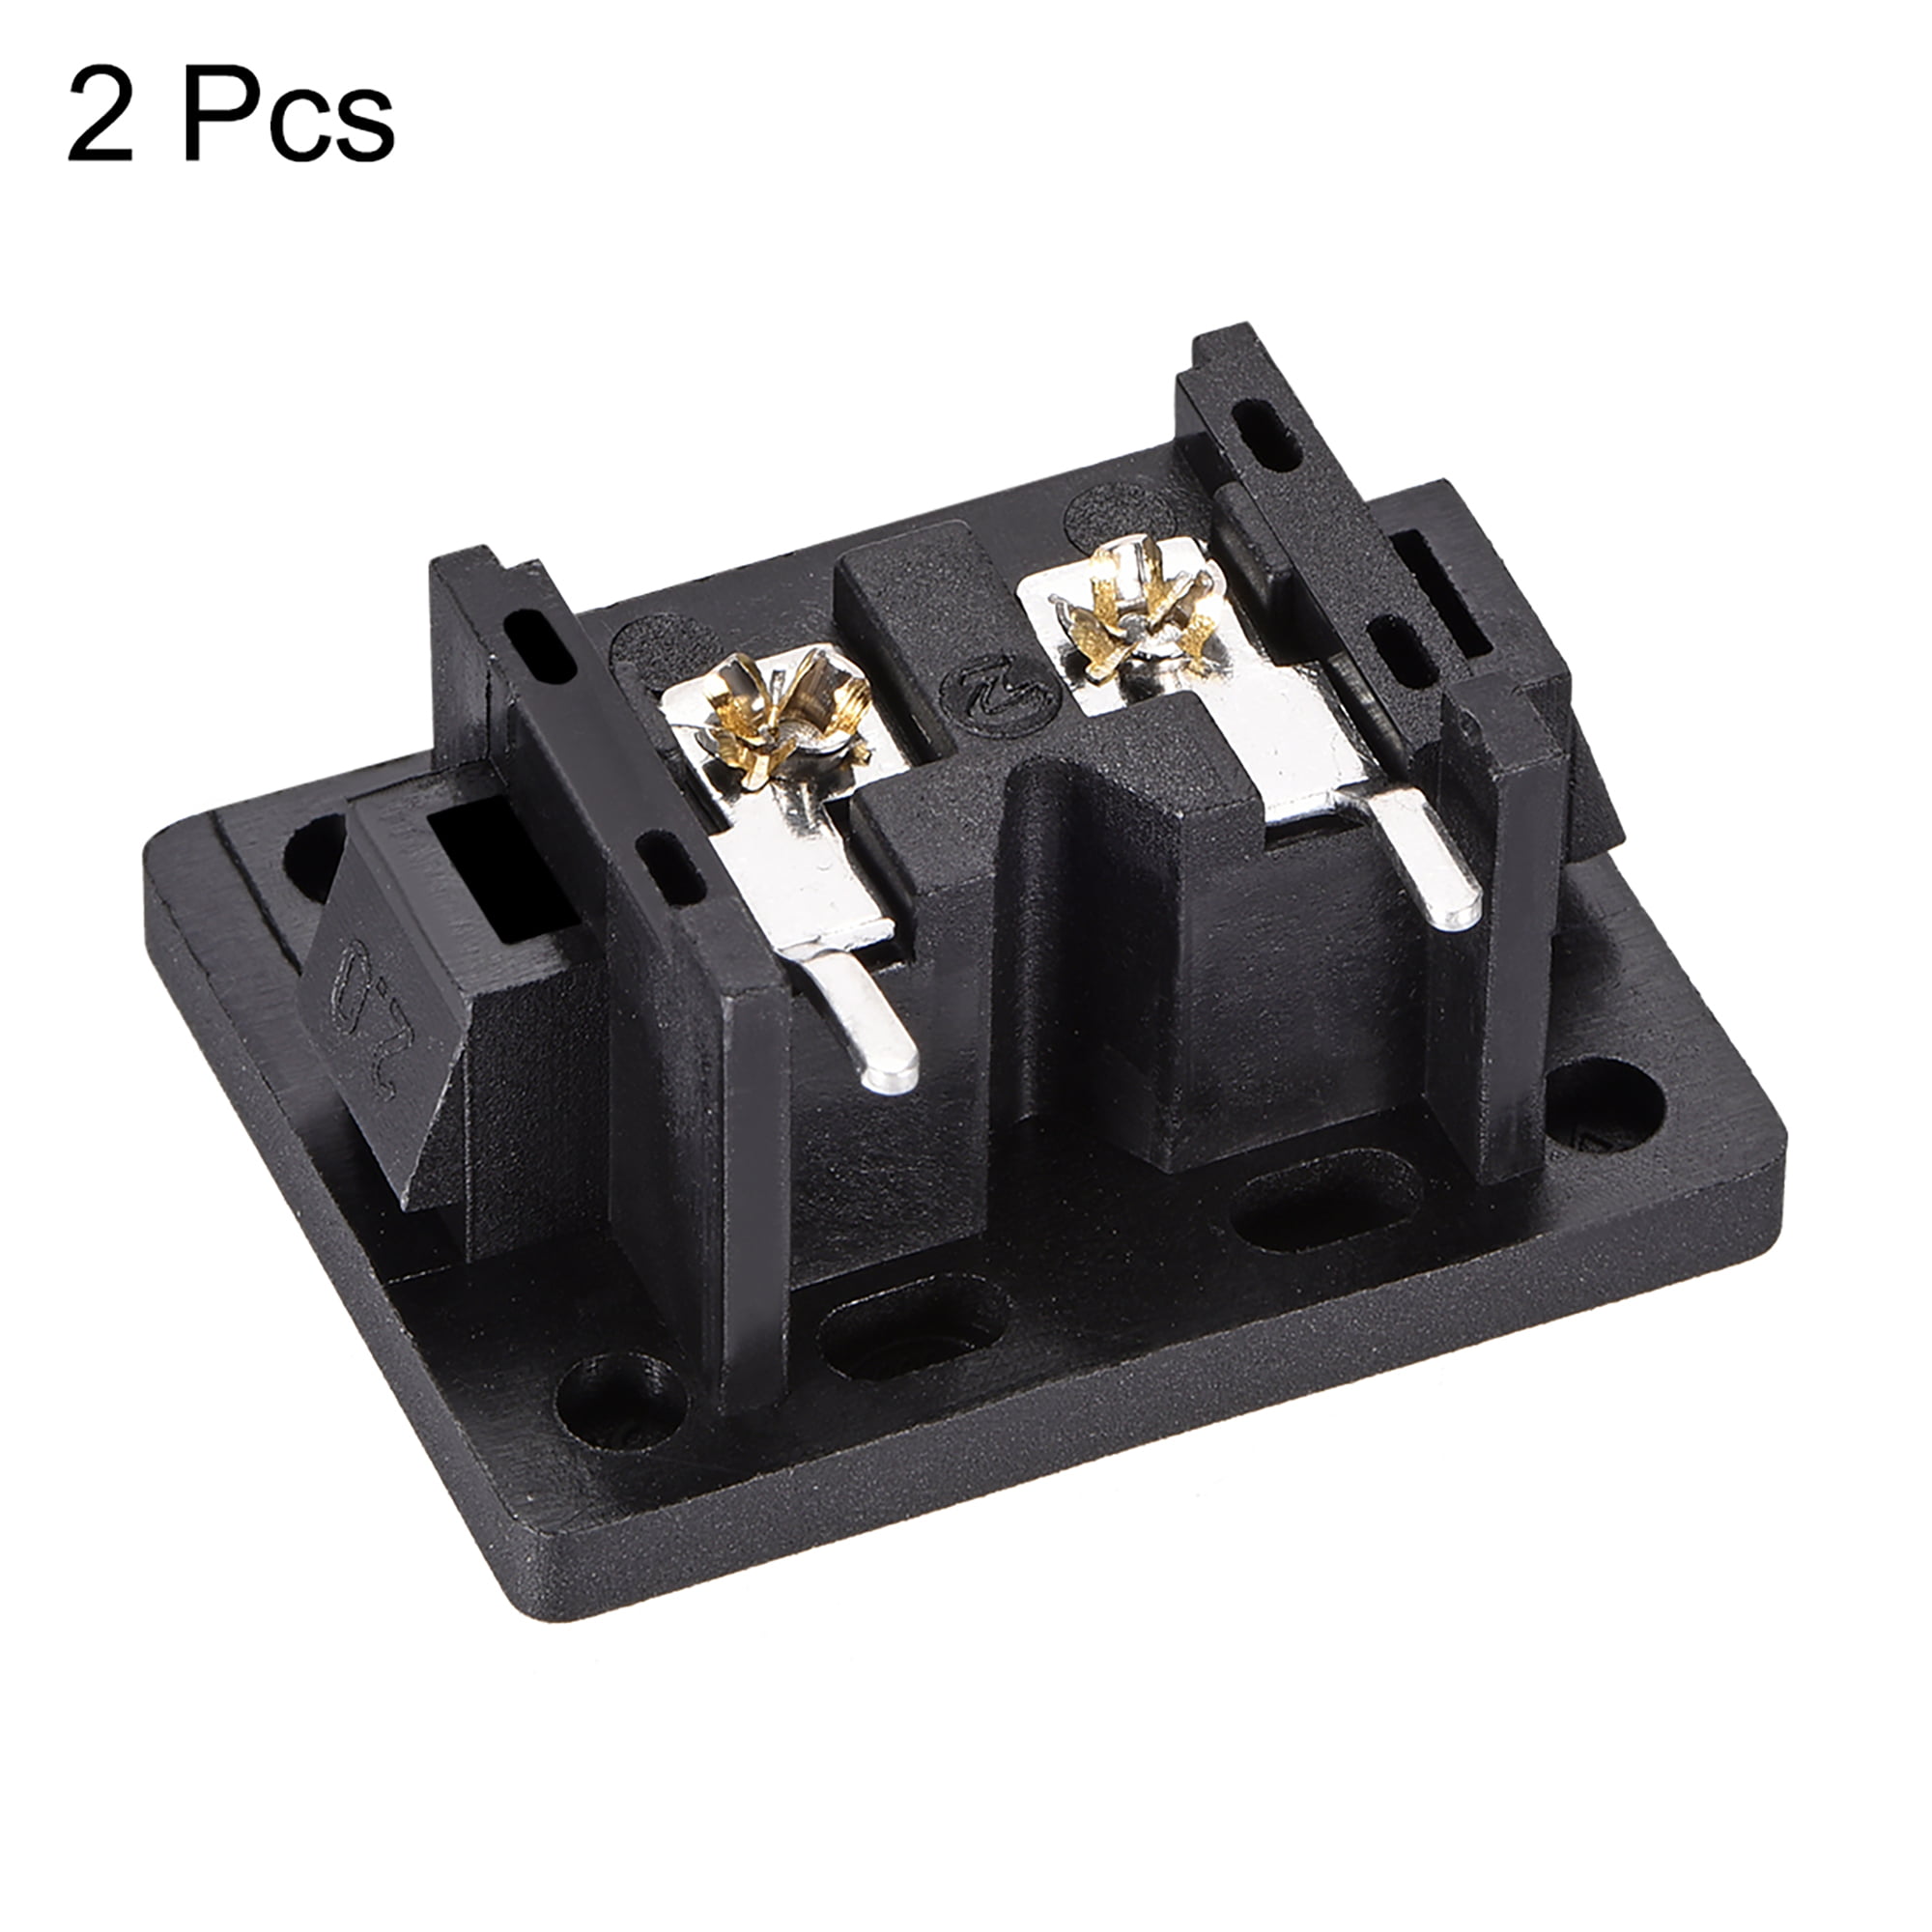 C8 Panel Mount Plug Adapter AC 250V 2.5A 2 Pins IEC Inlet Module Plug Power  Connector Socket Right Angle 2 pcs